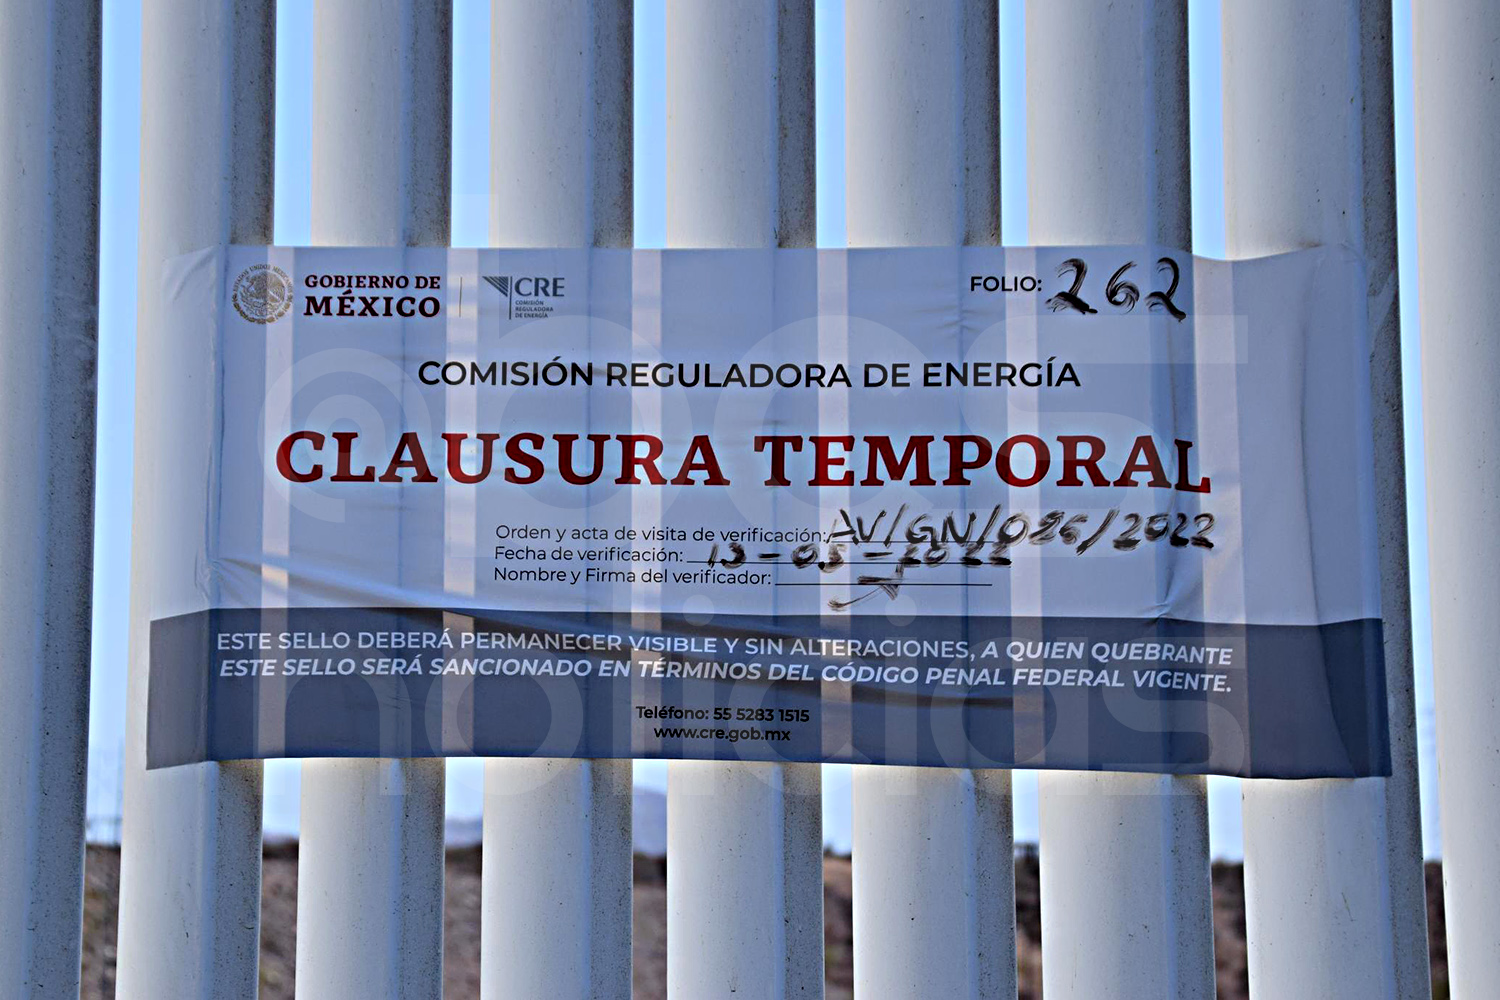 They failed an inspection;  they put closed seals on the natural gas plant in Pichilingue